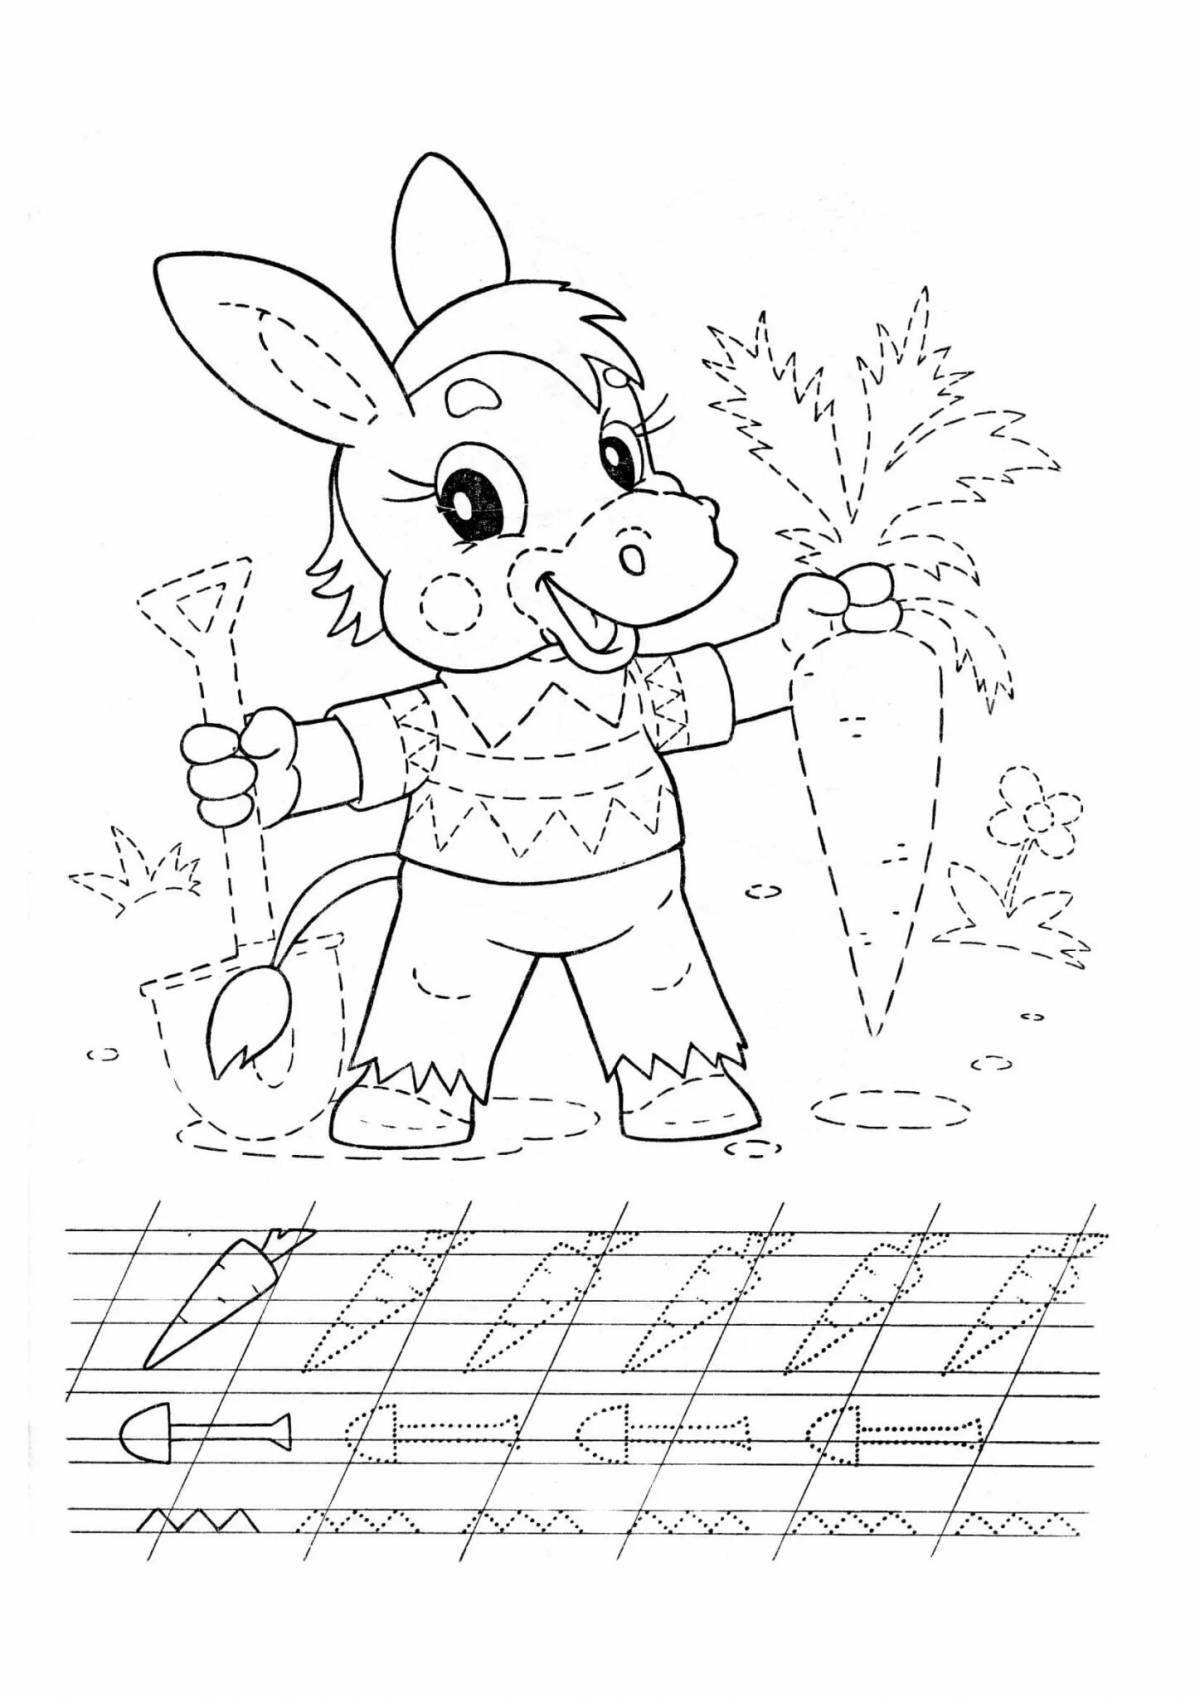 Fun coloring book recipe for 5 year olds